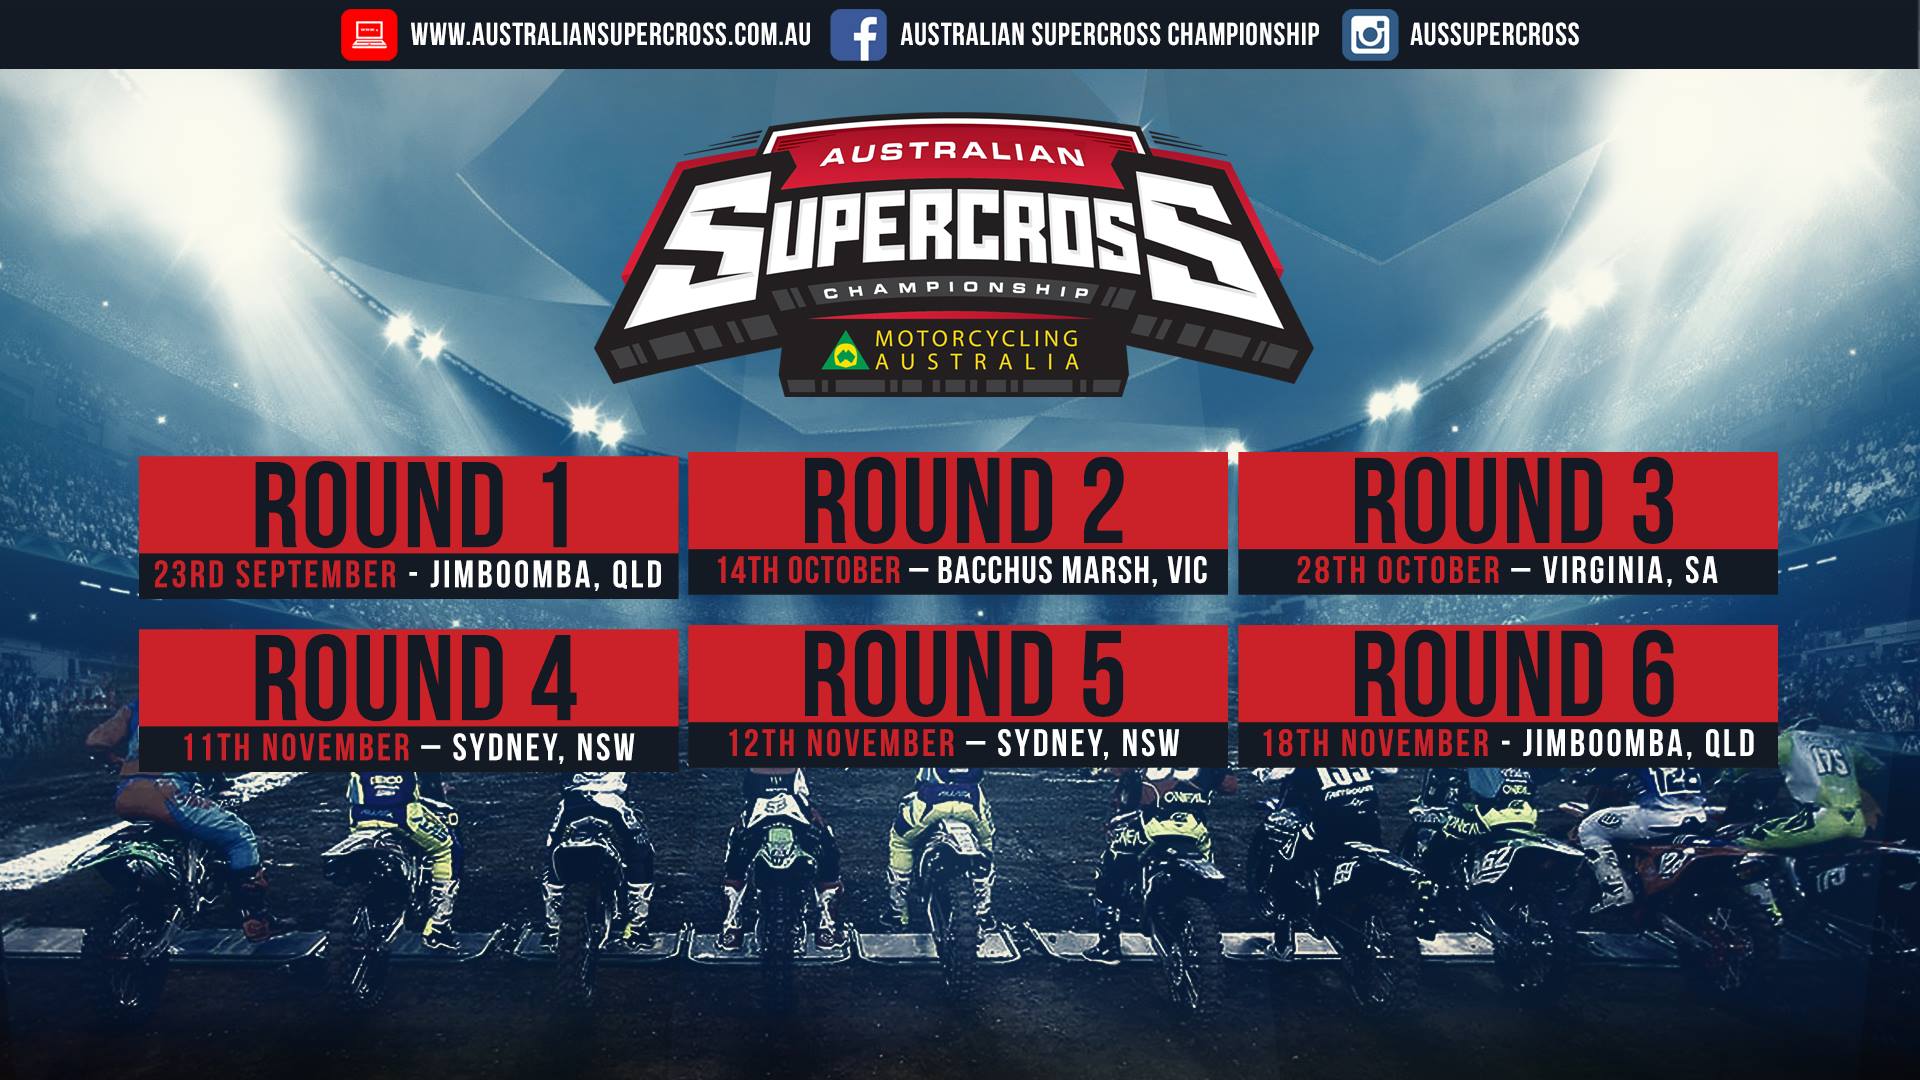 Australian Supercross Championship Calling for Marshals and Officials